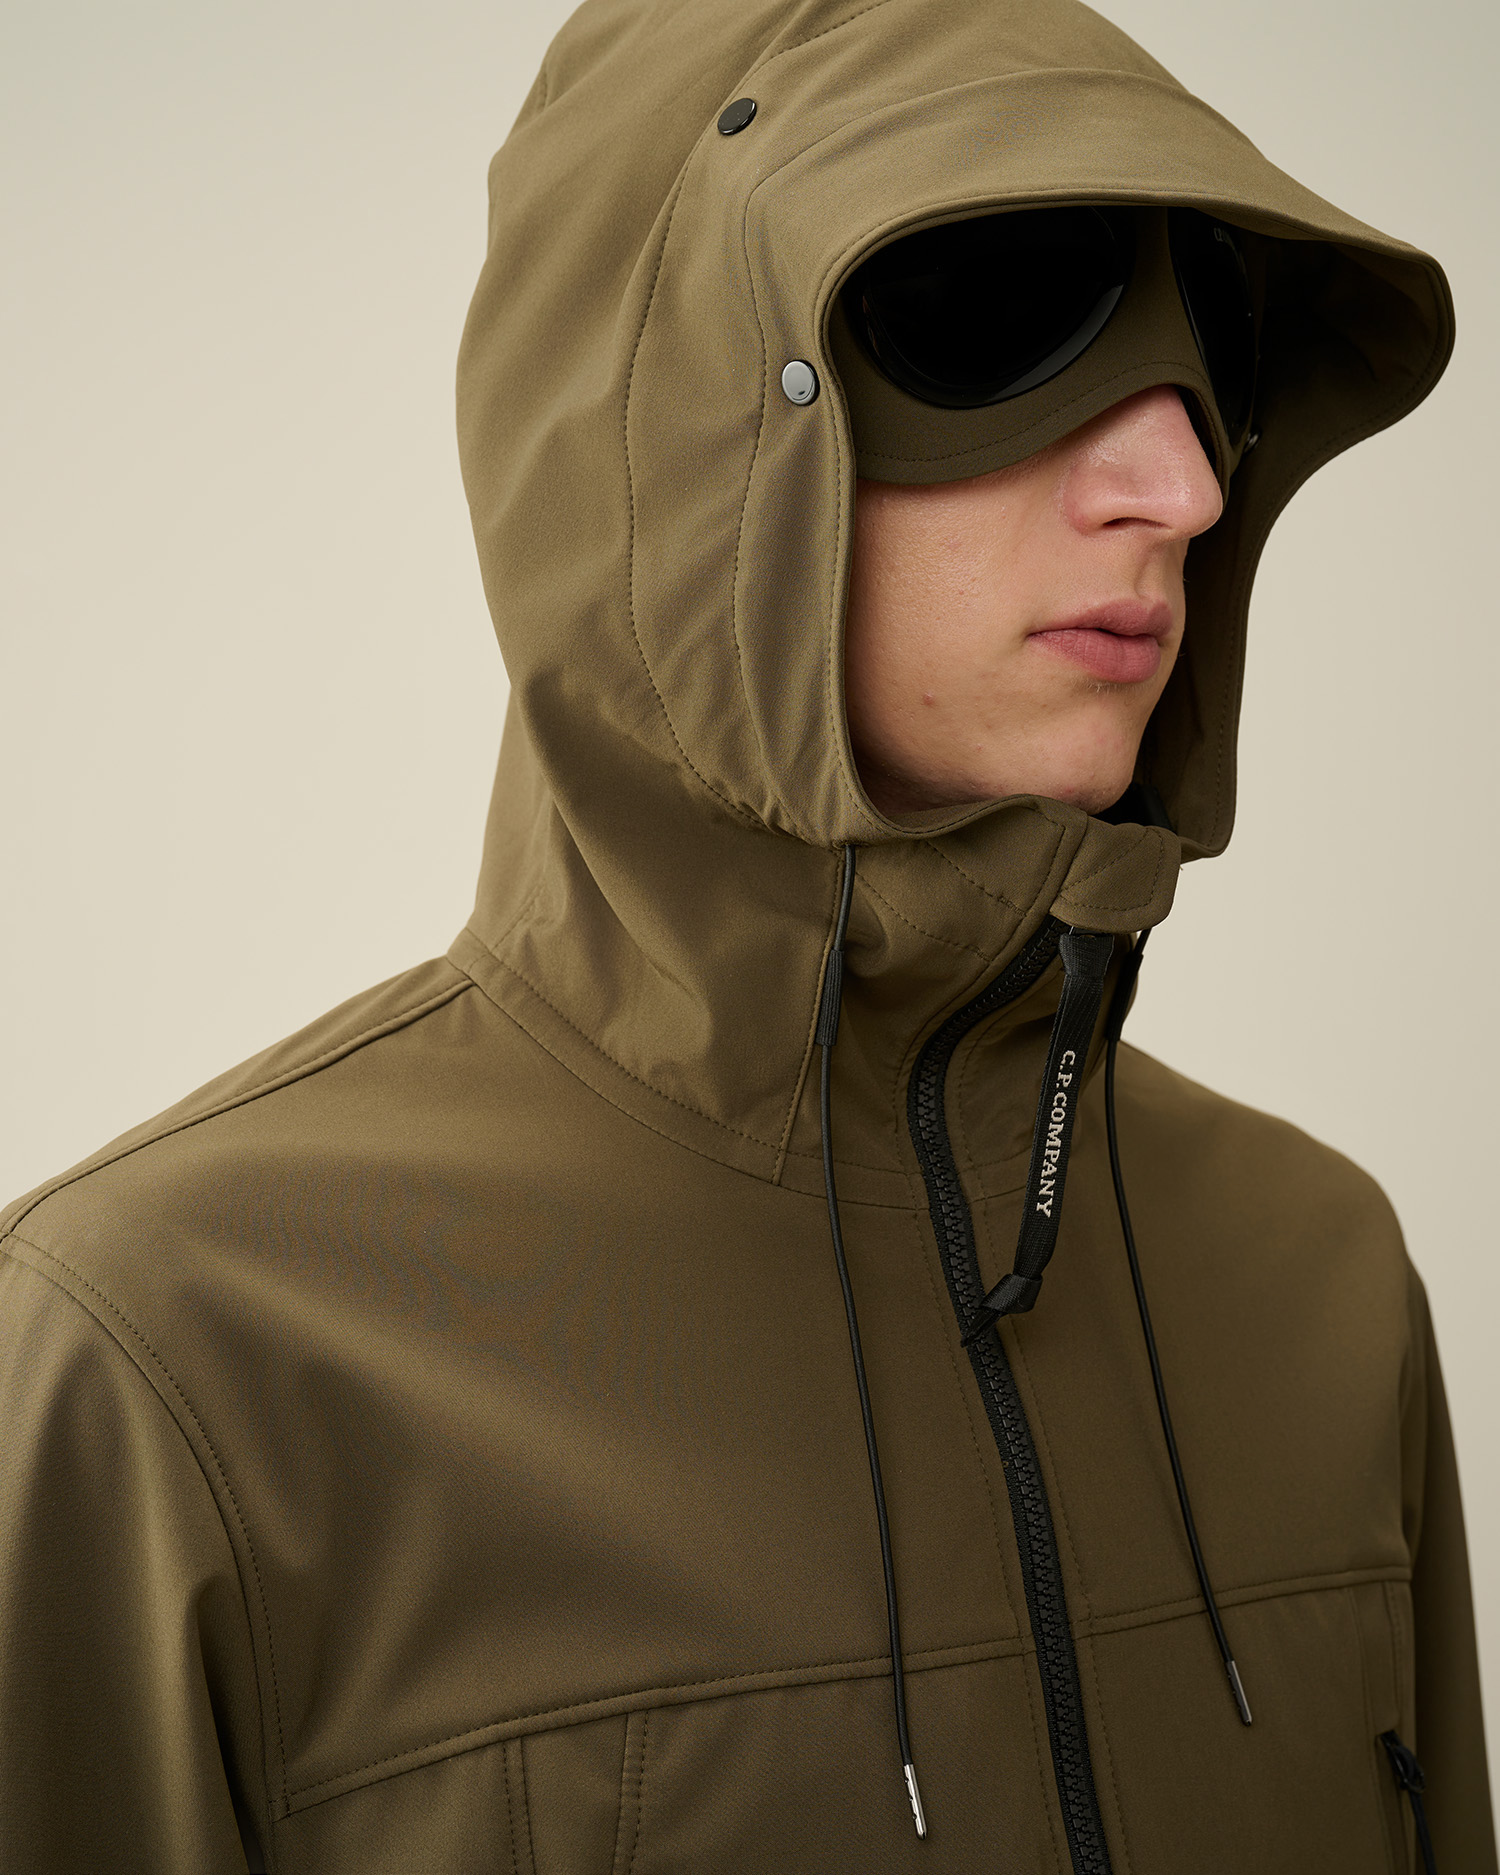 C.P. Shell-R Goggle Jacket | CPC JP Online Store